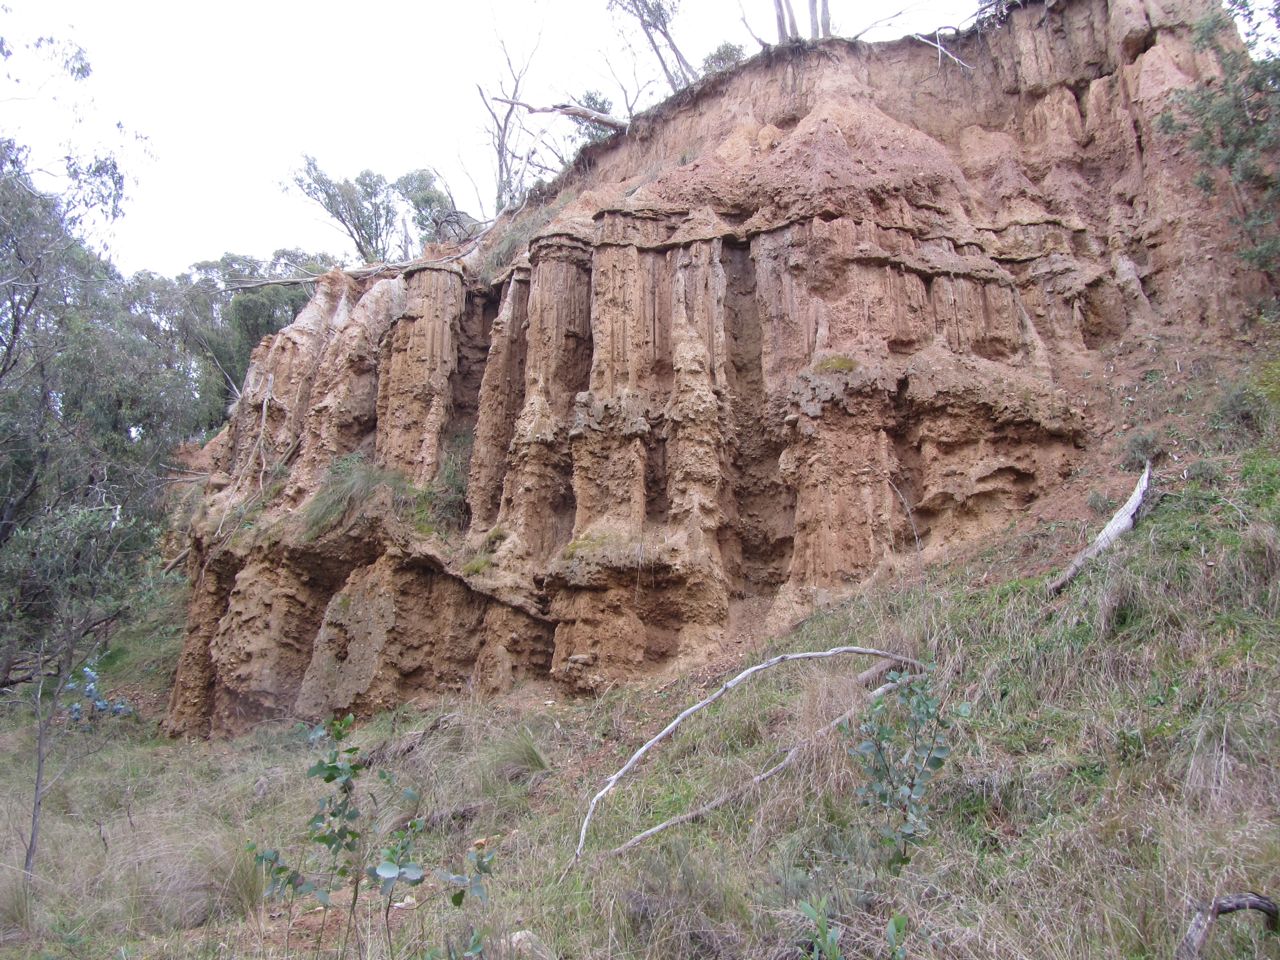 Unnatural land forms left by alluvial mining in another area.